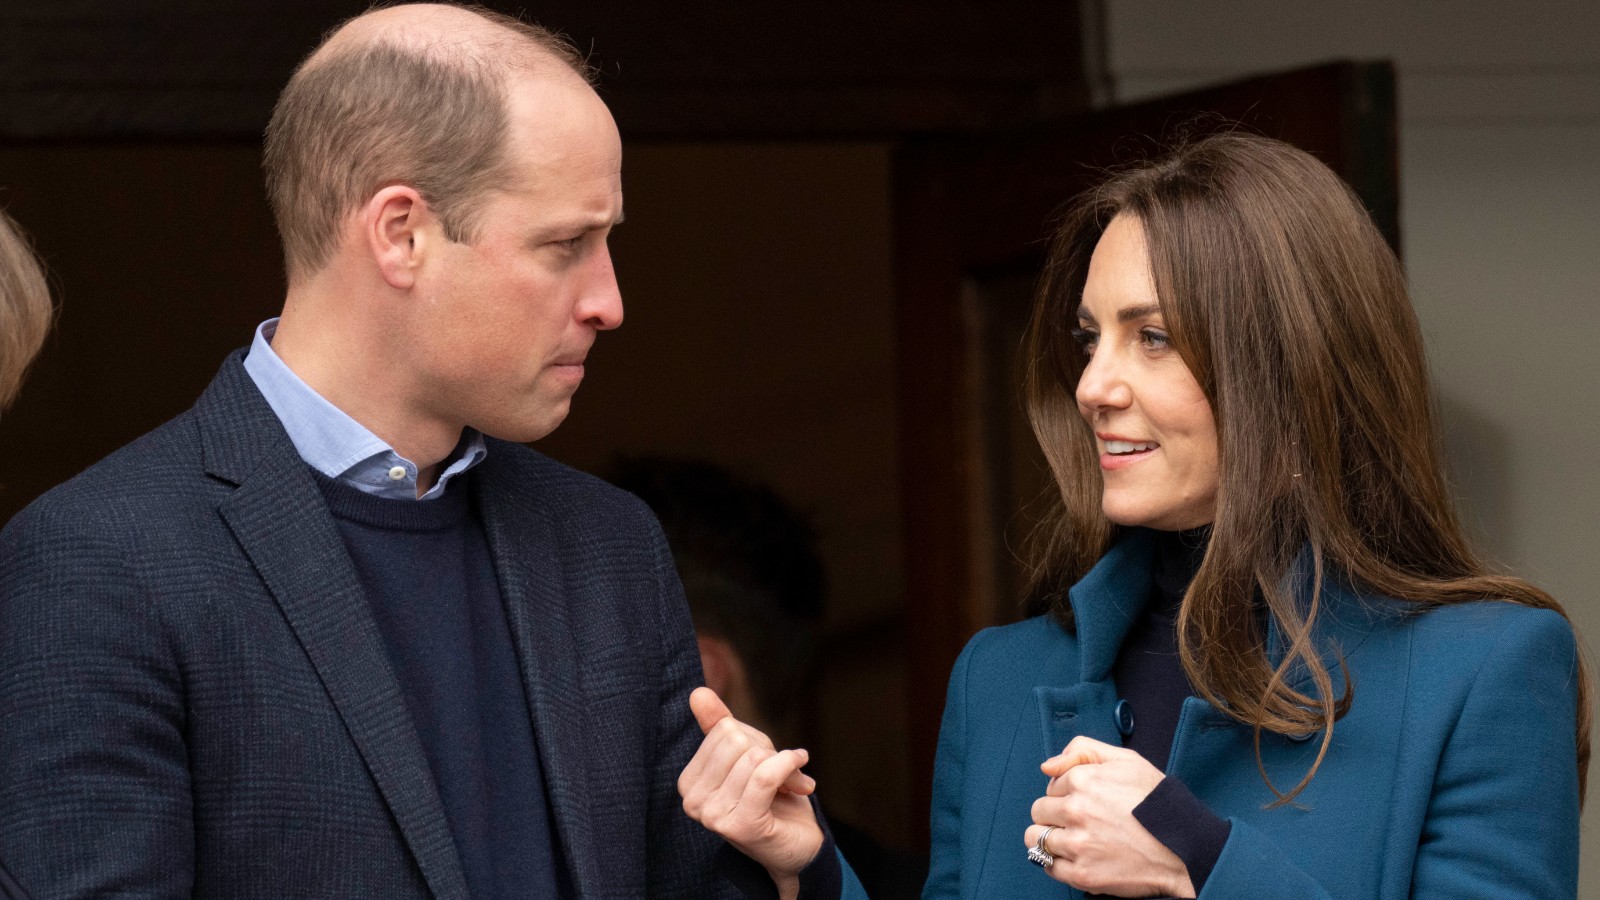 Kate Middleton gets hands on with Prince William in adorable PDA moment ...